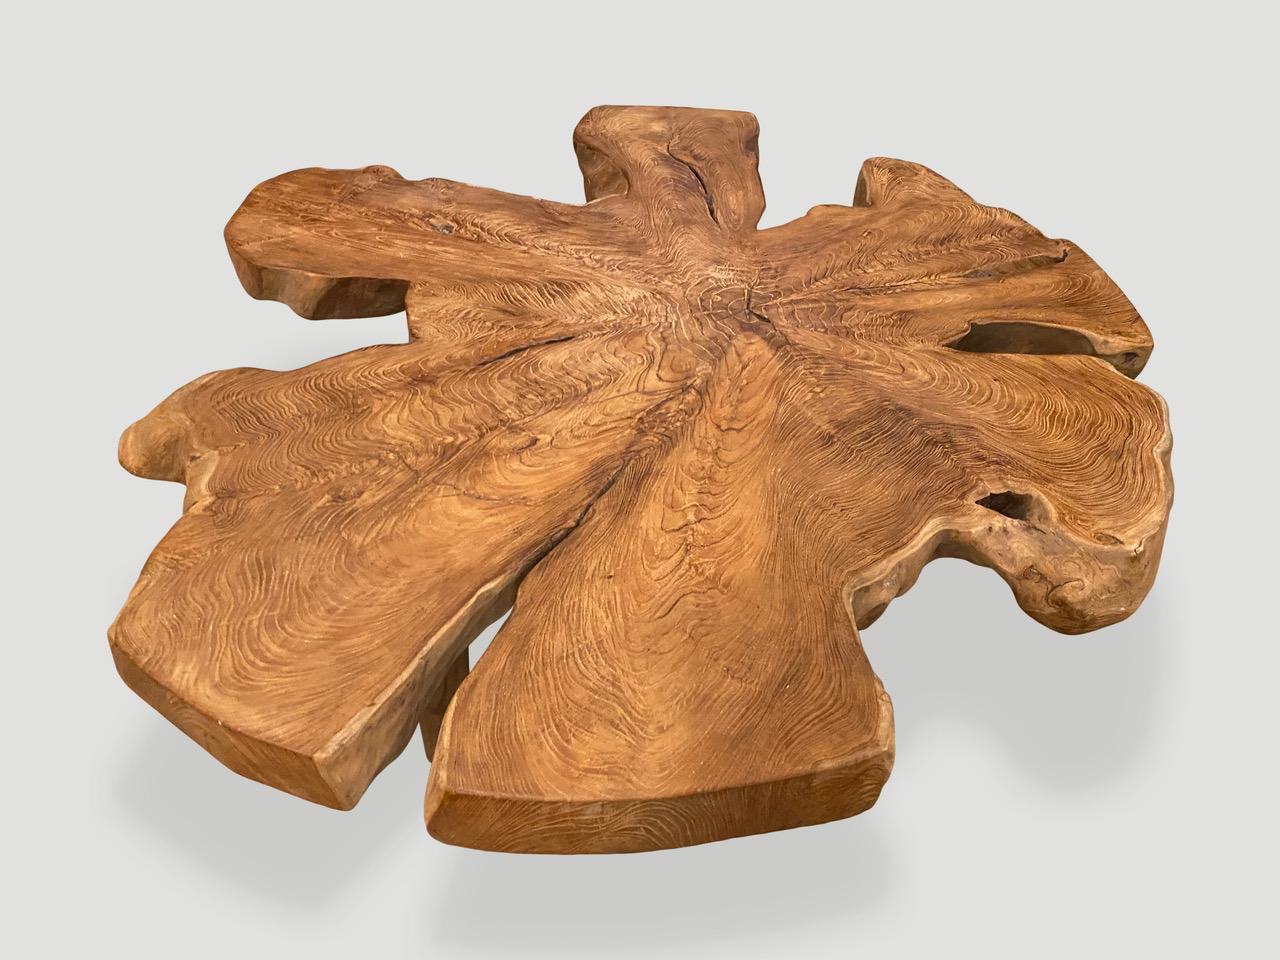 Andrianna Shamaris Organic Teak Wood Root Coffee Table In Excellent Condition For Sale In New York, NY